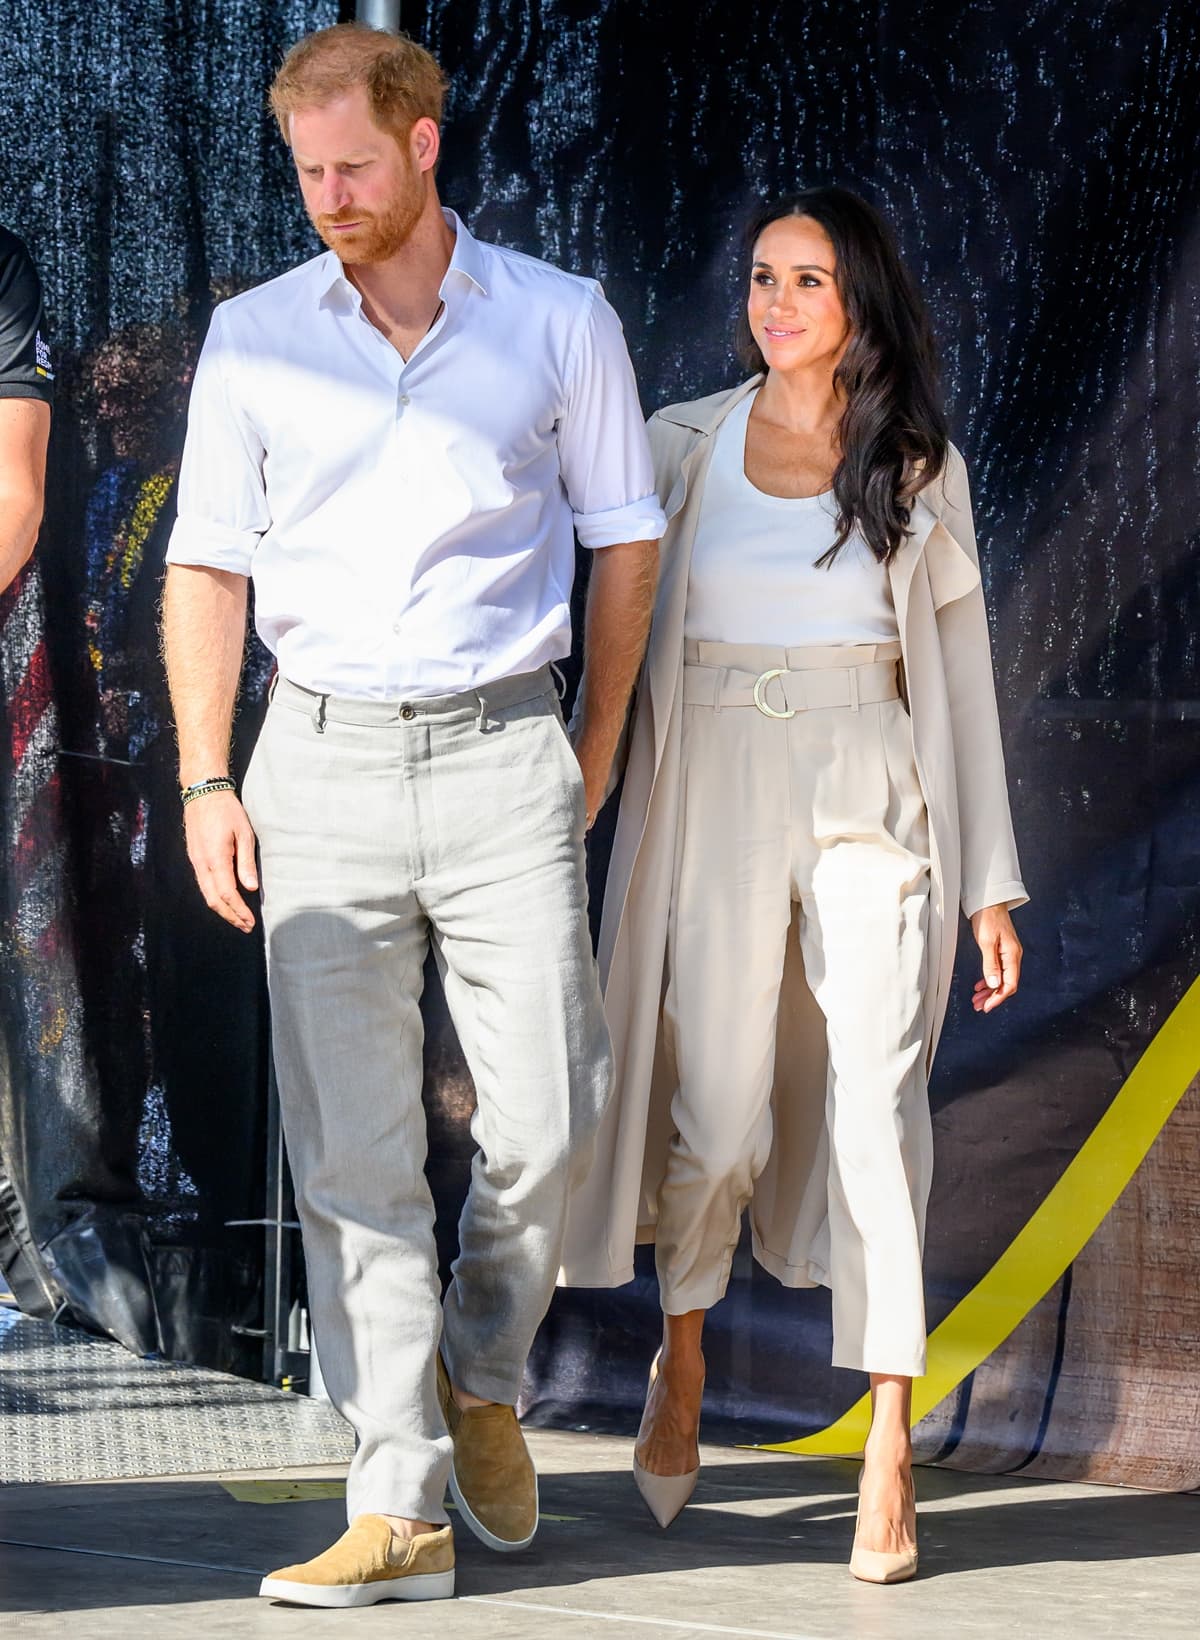 At the Invictus Games Düsseldorf 2023 in Dusseldorf, Germany, on September 16, Prince Harry, Duke of Sussex, standing 6 feet 1 ¼ inches, and Meghan, Duchess of Sussex, at 5 feet 5 inches, attended the swimming medal ceremony, showcasing their poise and height difference